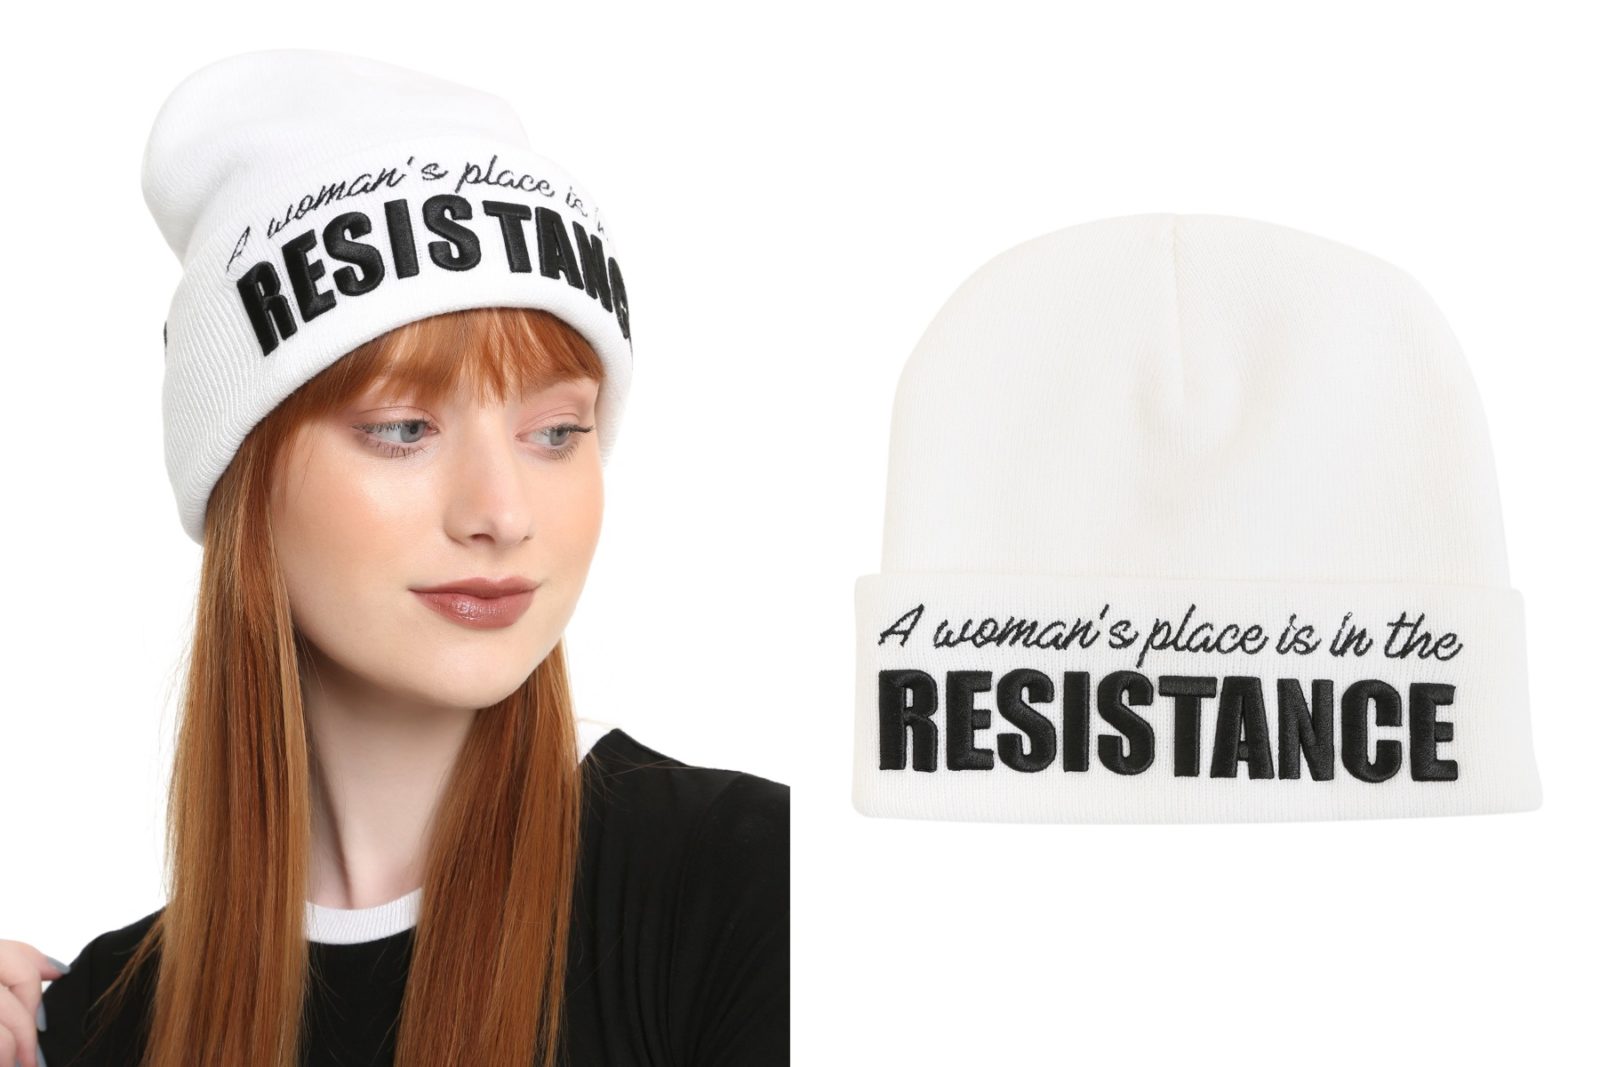 Women's Star Wars Resistance beanie at Hot Topic